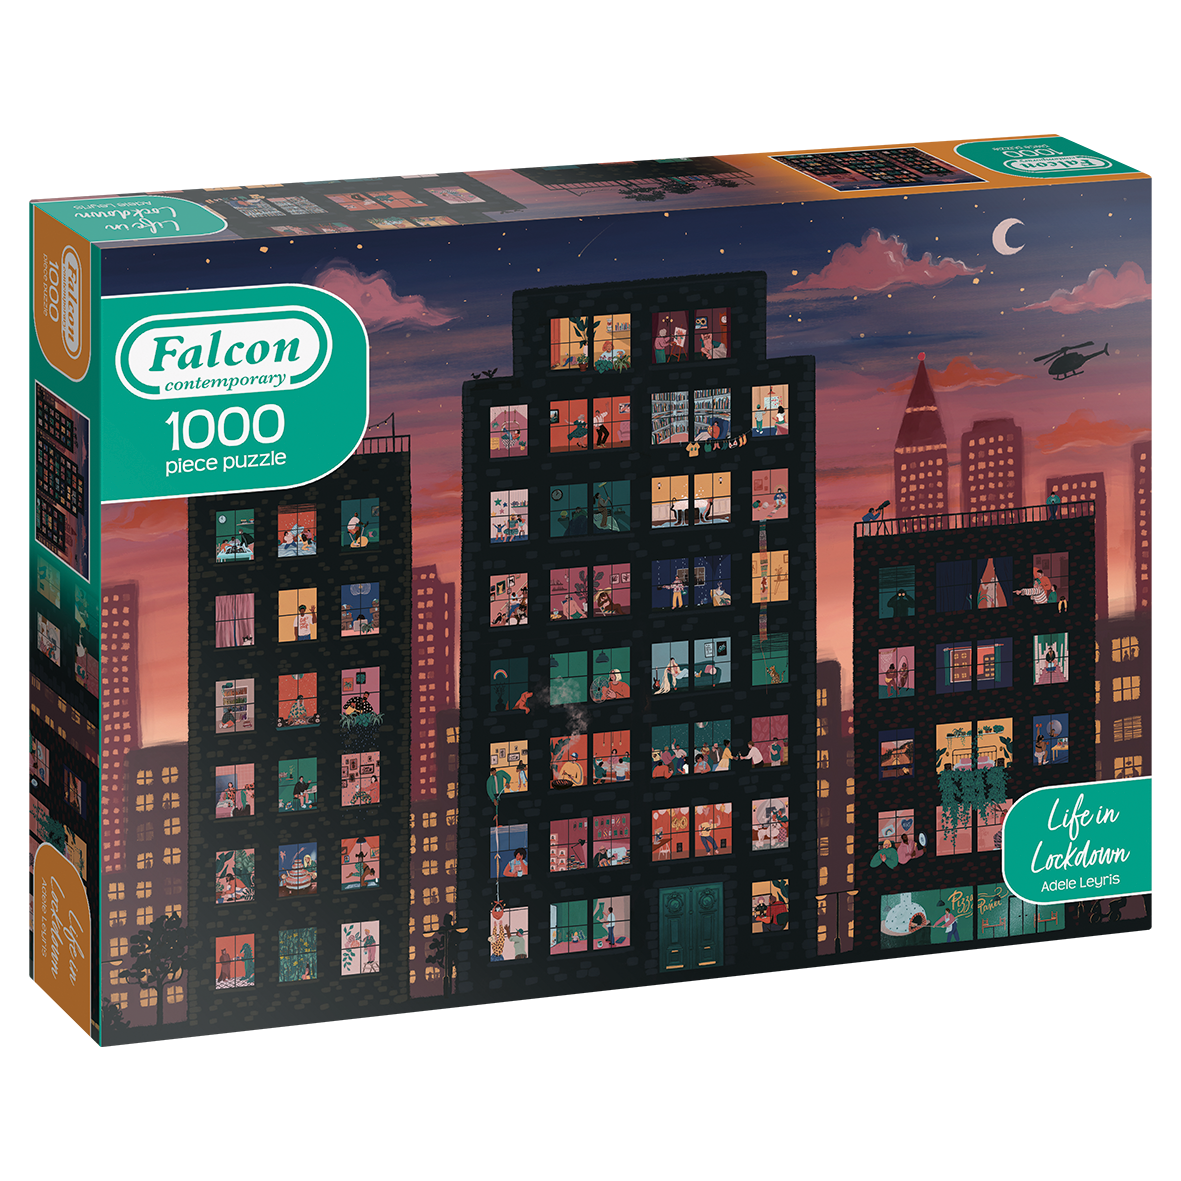 Life IN Lockdown Stadt Skyline 1000 Teile Falcon Contemporary Puzzlespiel 11357 